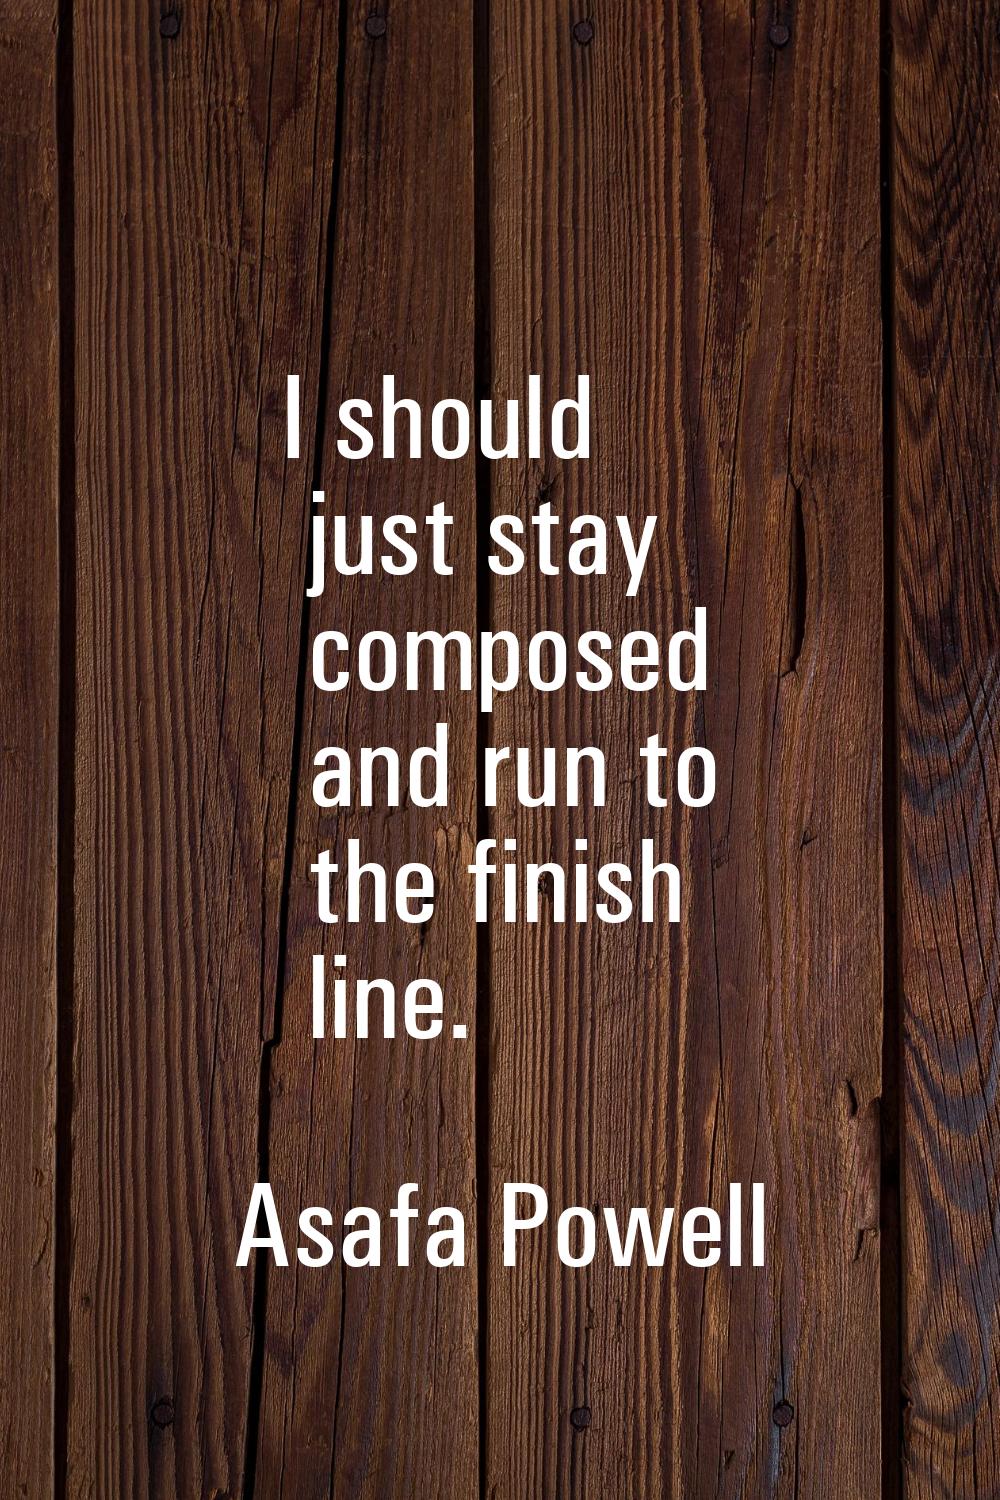 I should just stay composed and run to the finish line.